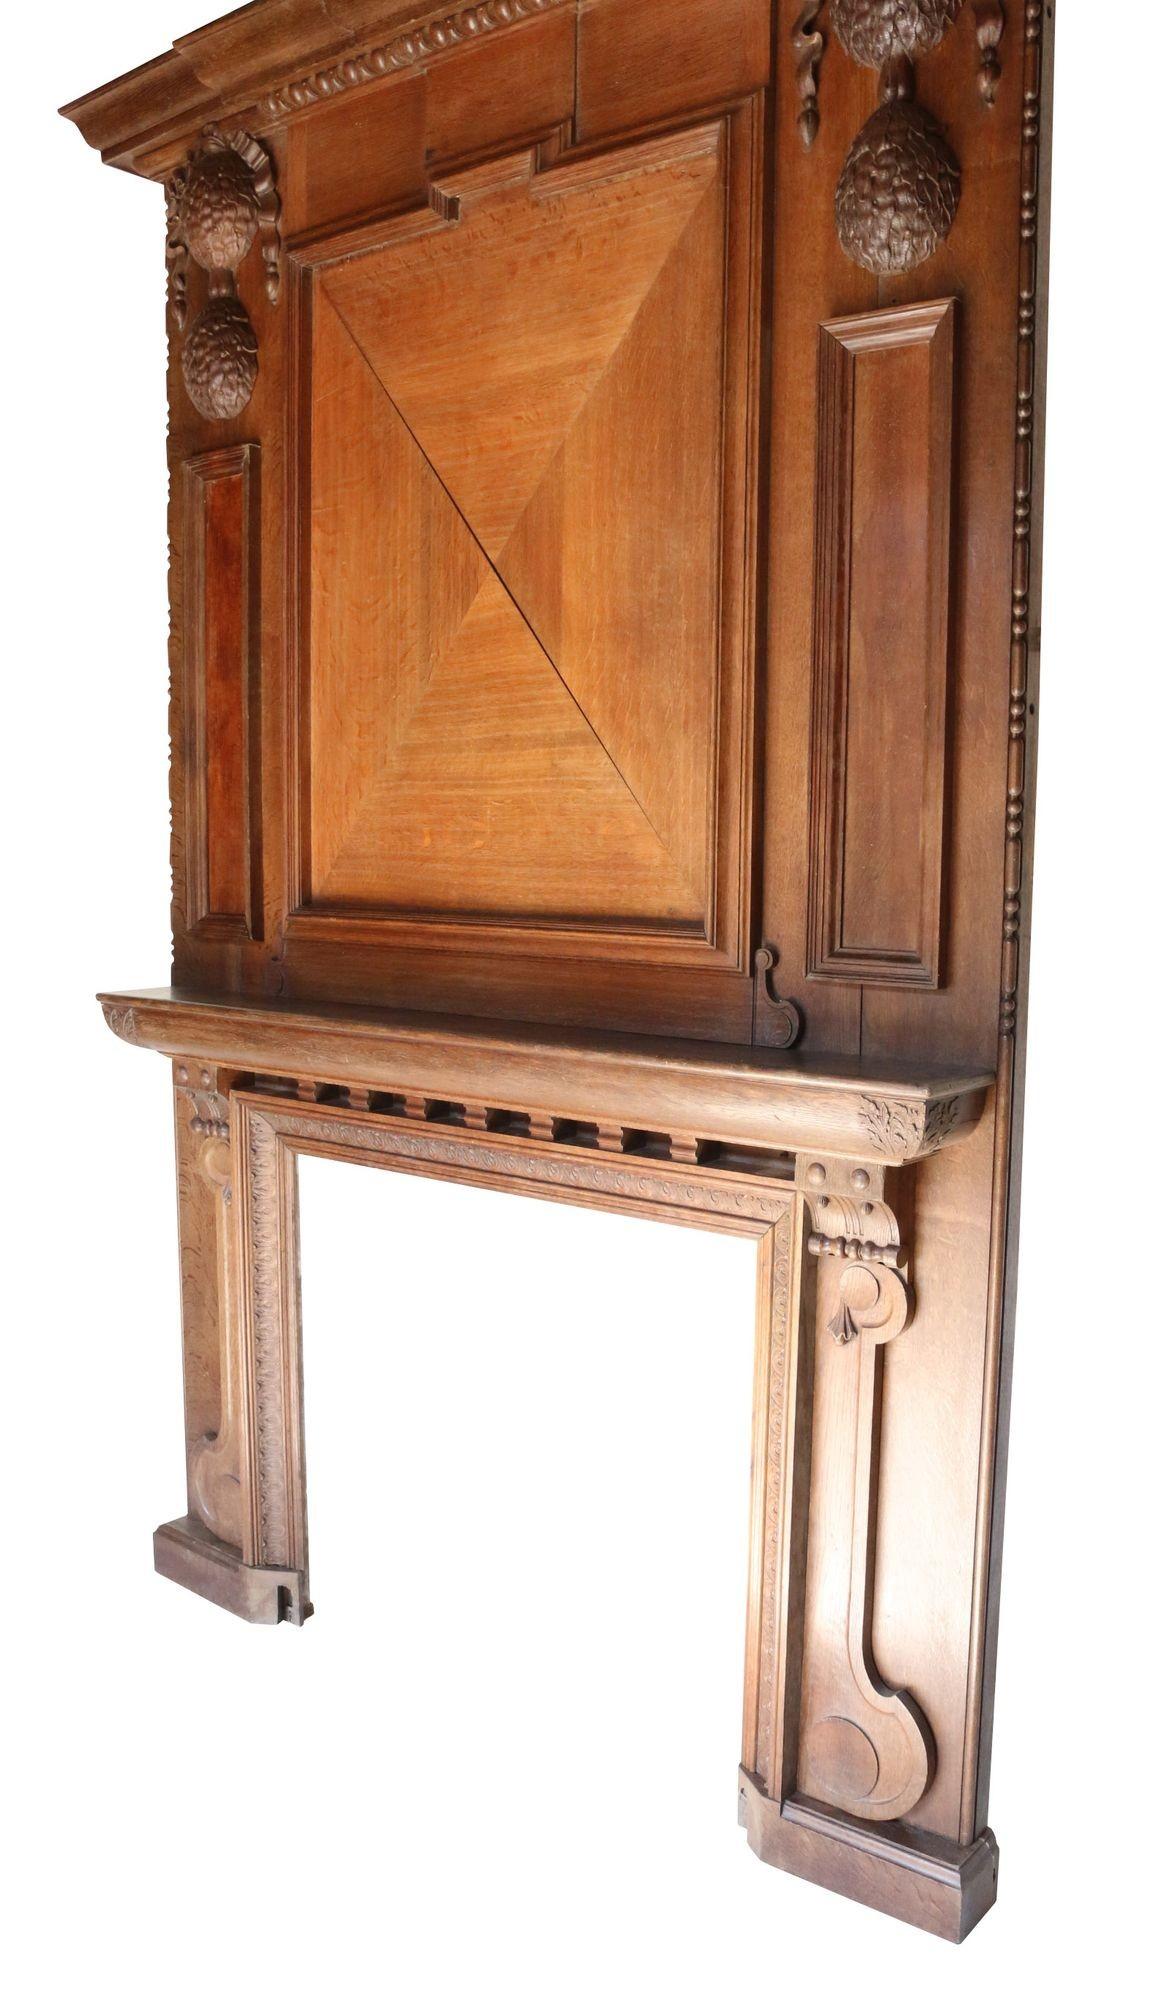 This imposing surround and over-mantle was reclaimed from a property in London during the 1950s' and has been in storage since. Constructed from English Oak

Opening Height 102.5 cm

Opening Width 114 cm

Width between outside of legs 205 cm